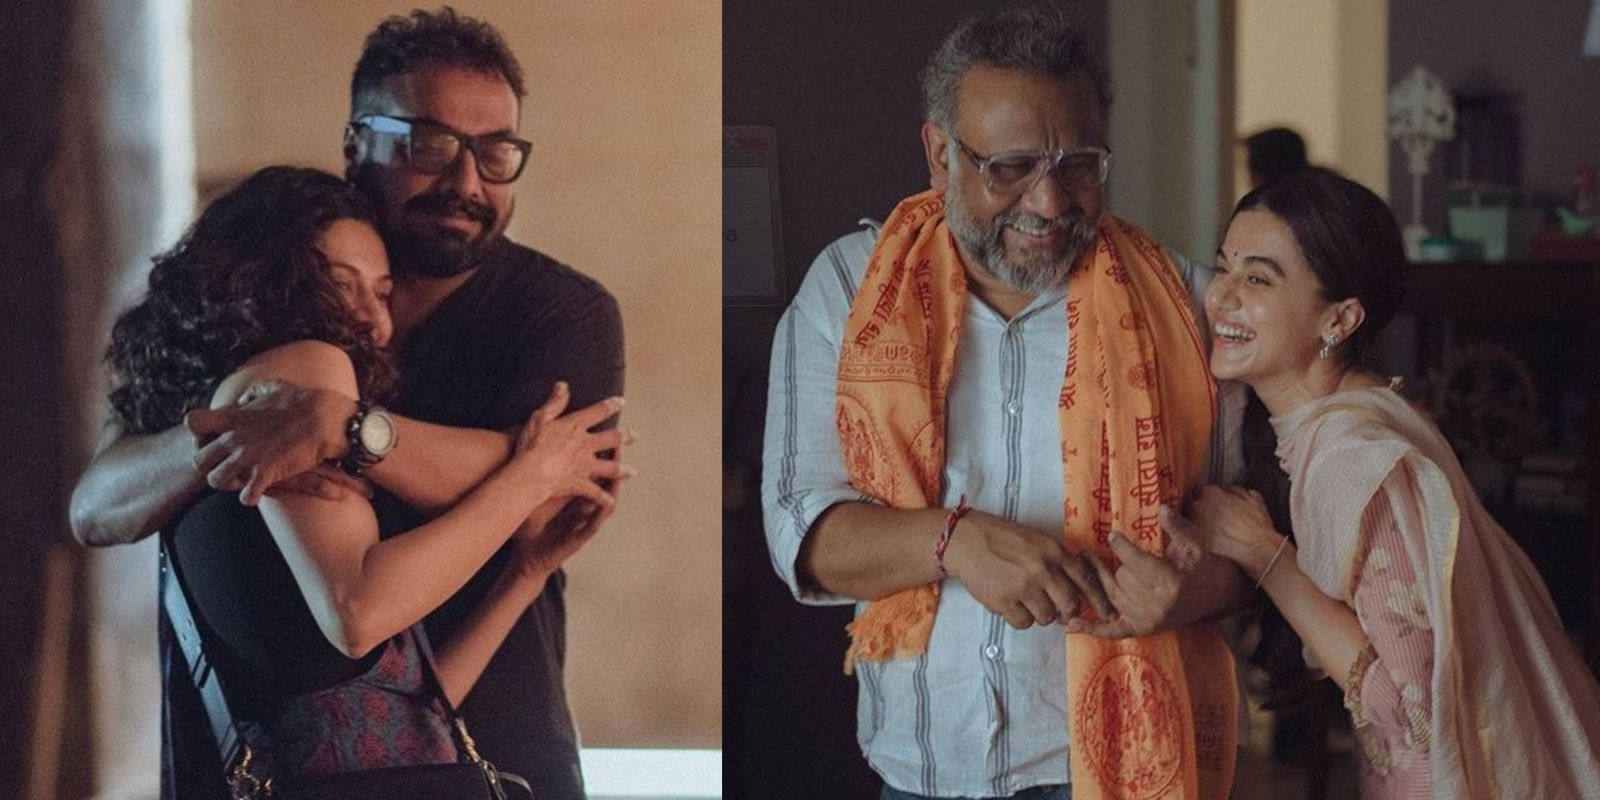 Taapsee Pannu Opens Up About Her Equation With Anubhav Sinha And Anurag Kashyap; Says 'I Feel Comfortable Around Them'